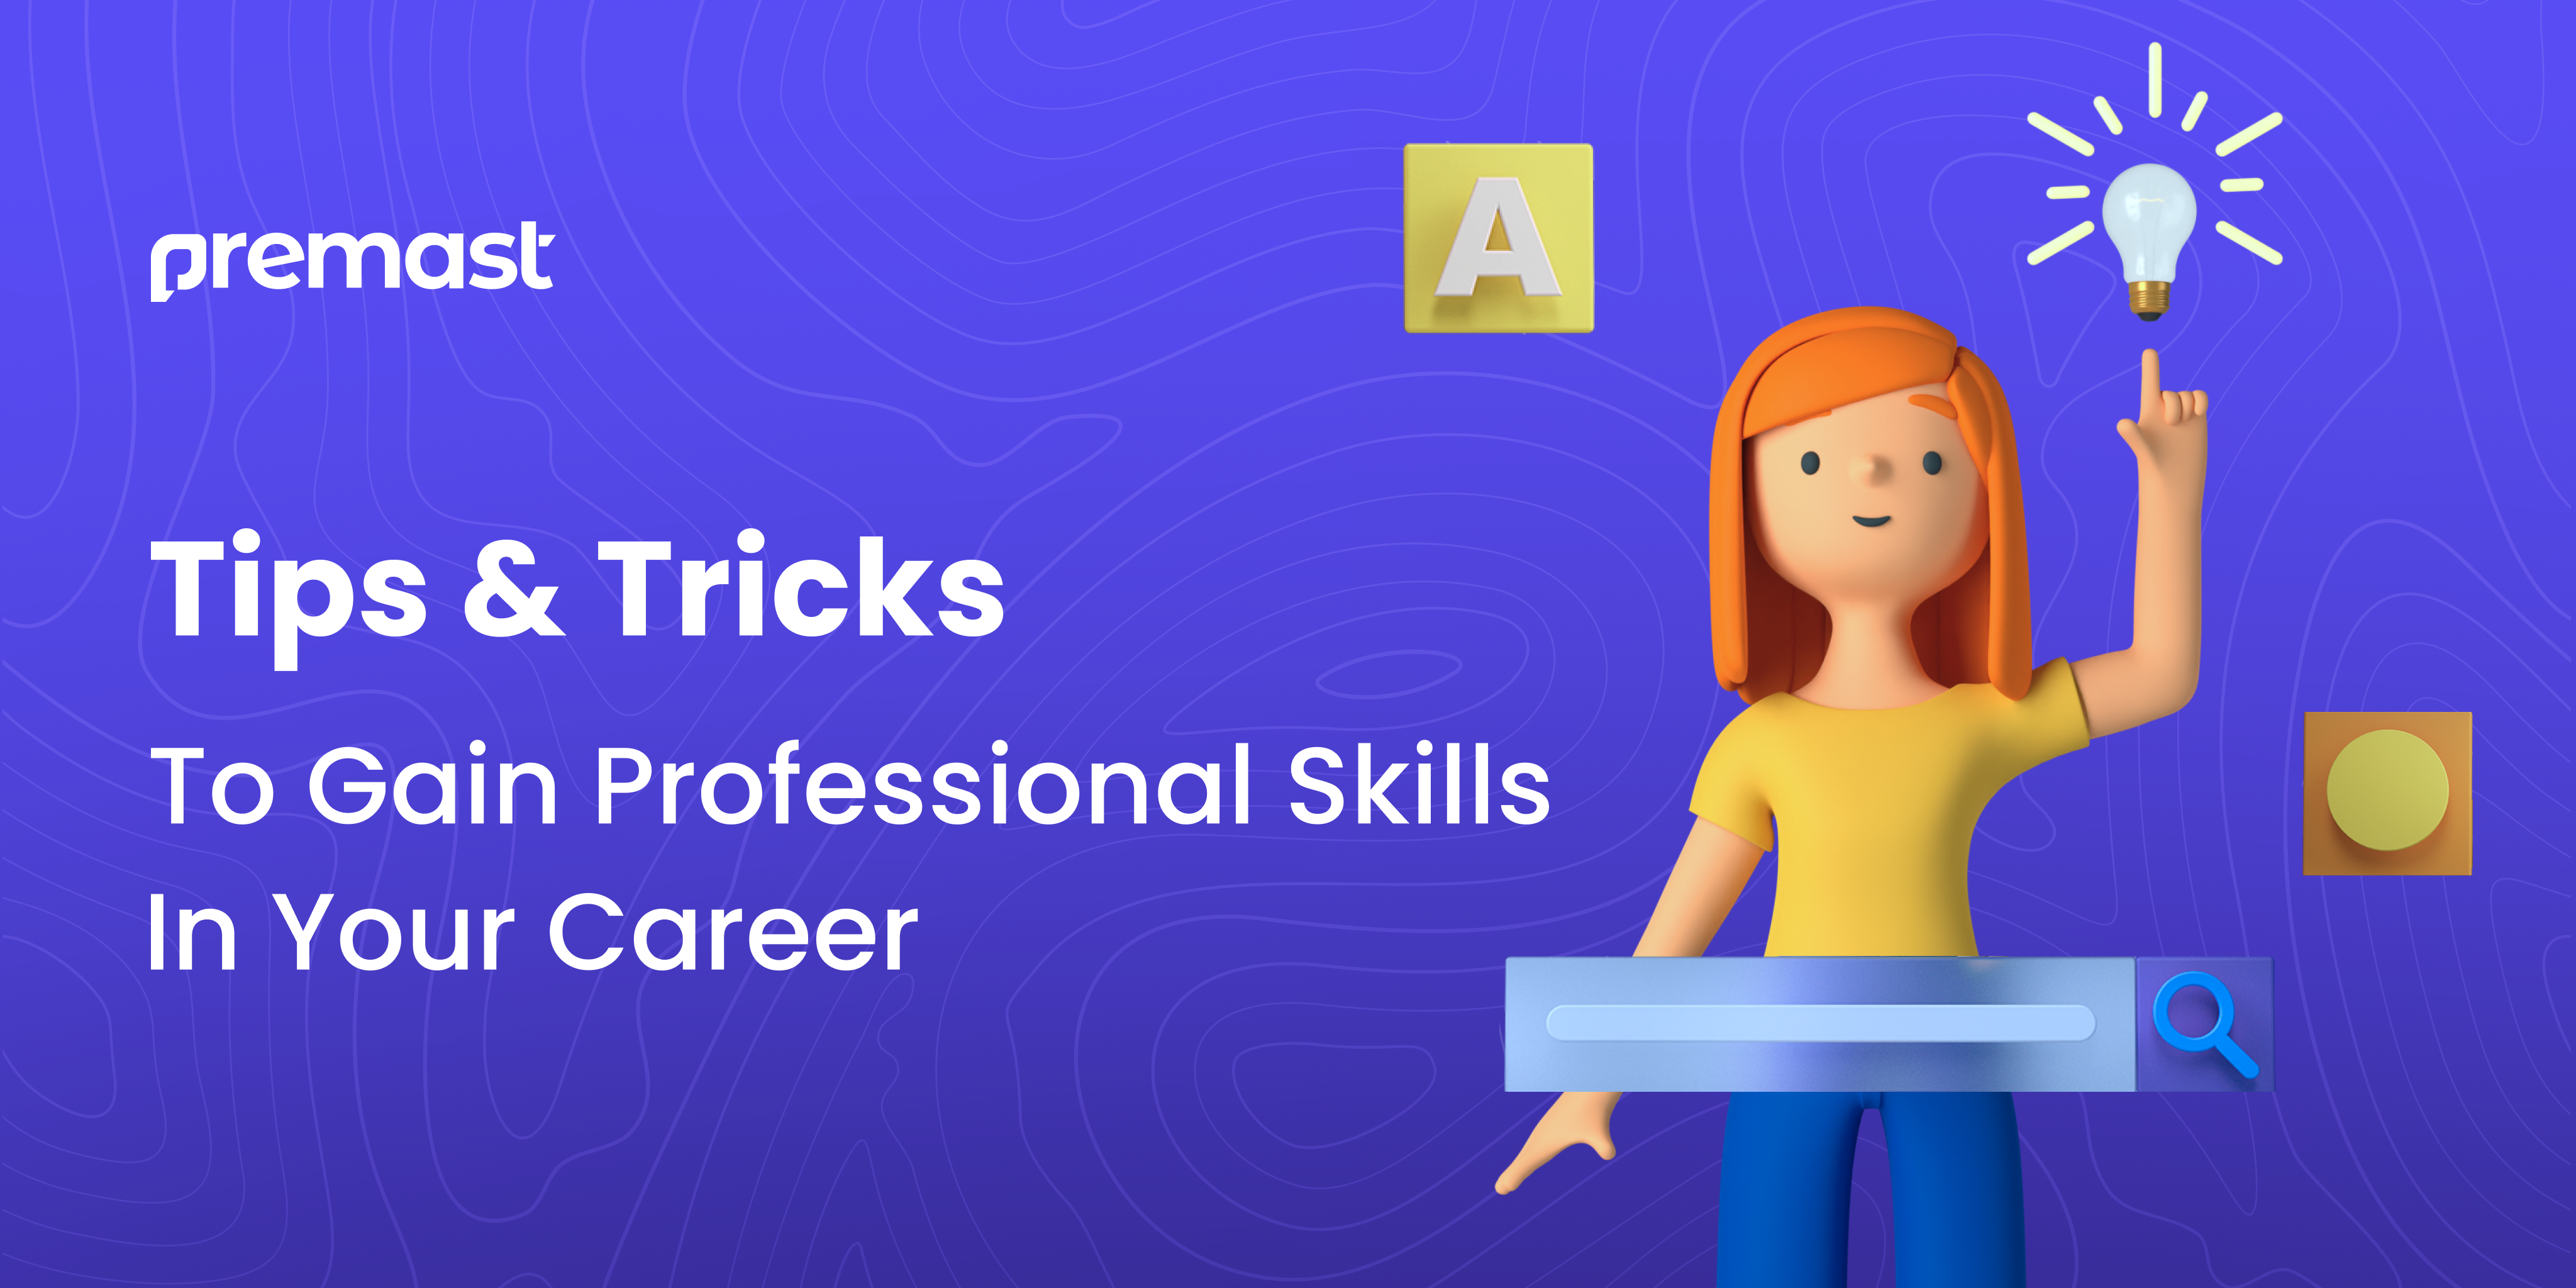 Tips& Tricks To Gain Professional Skills In Your Career.